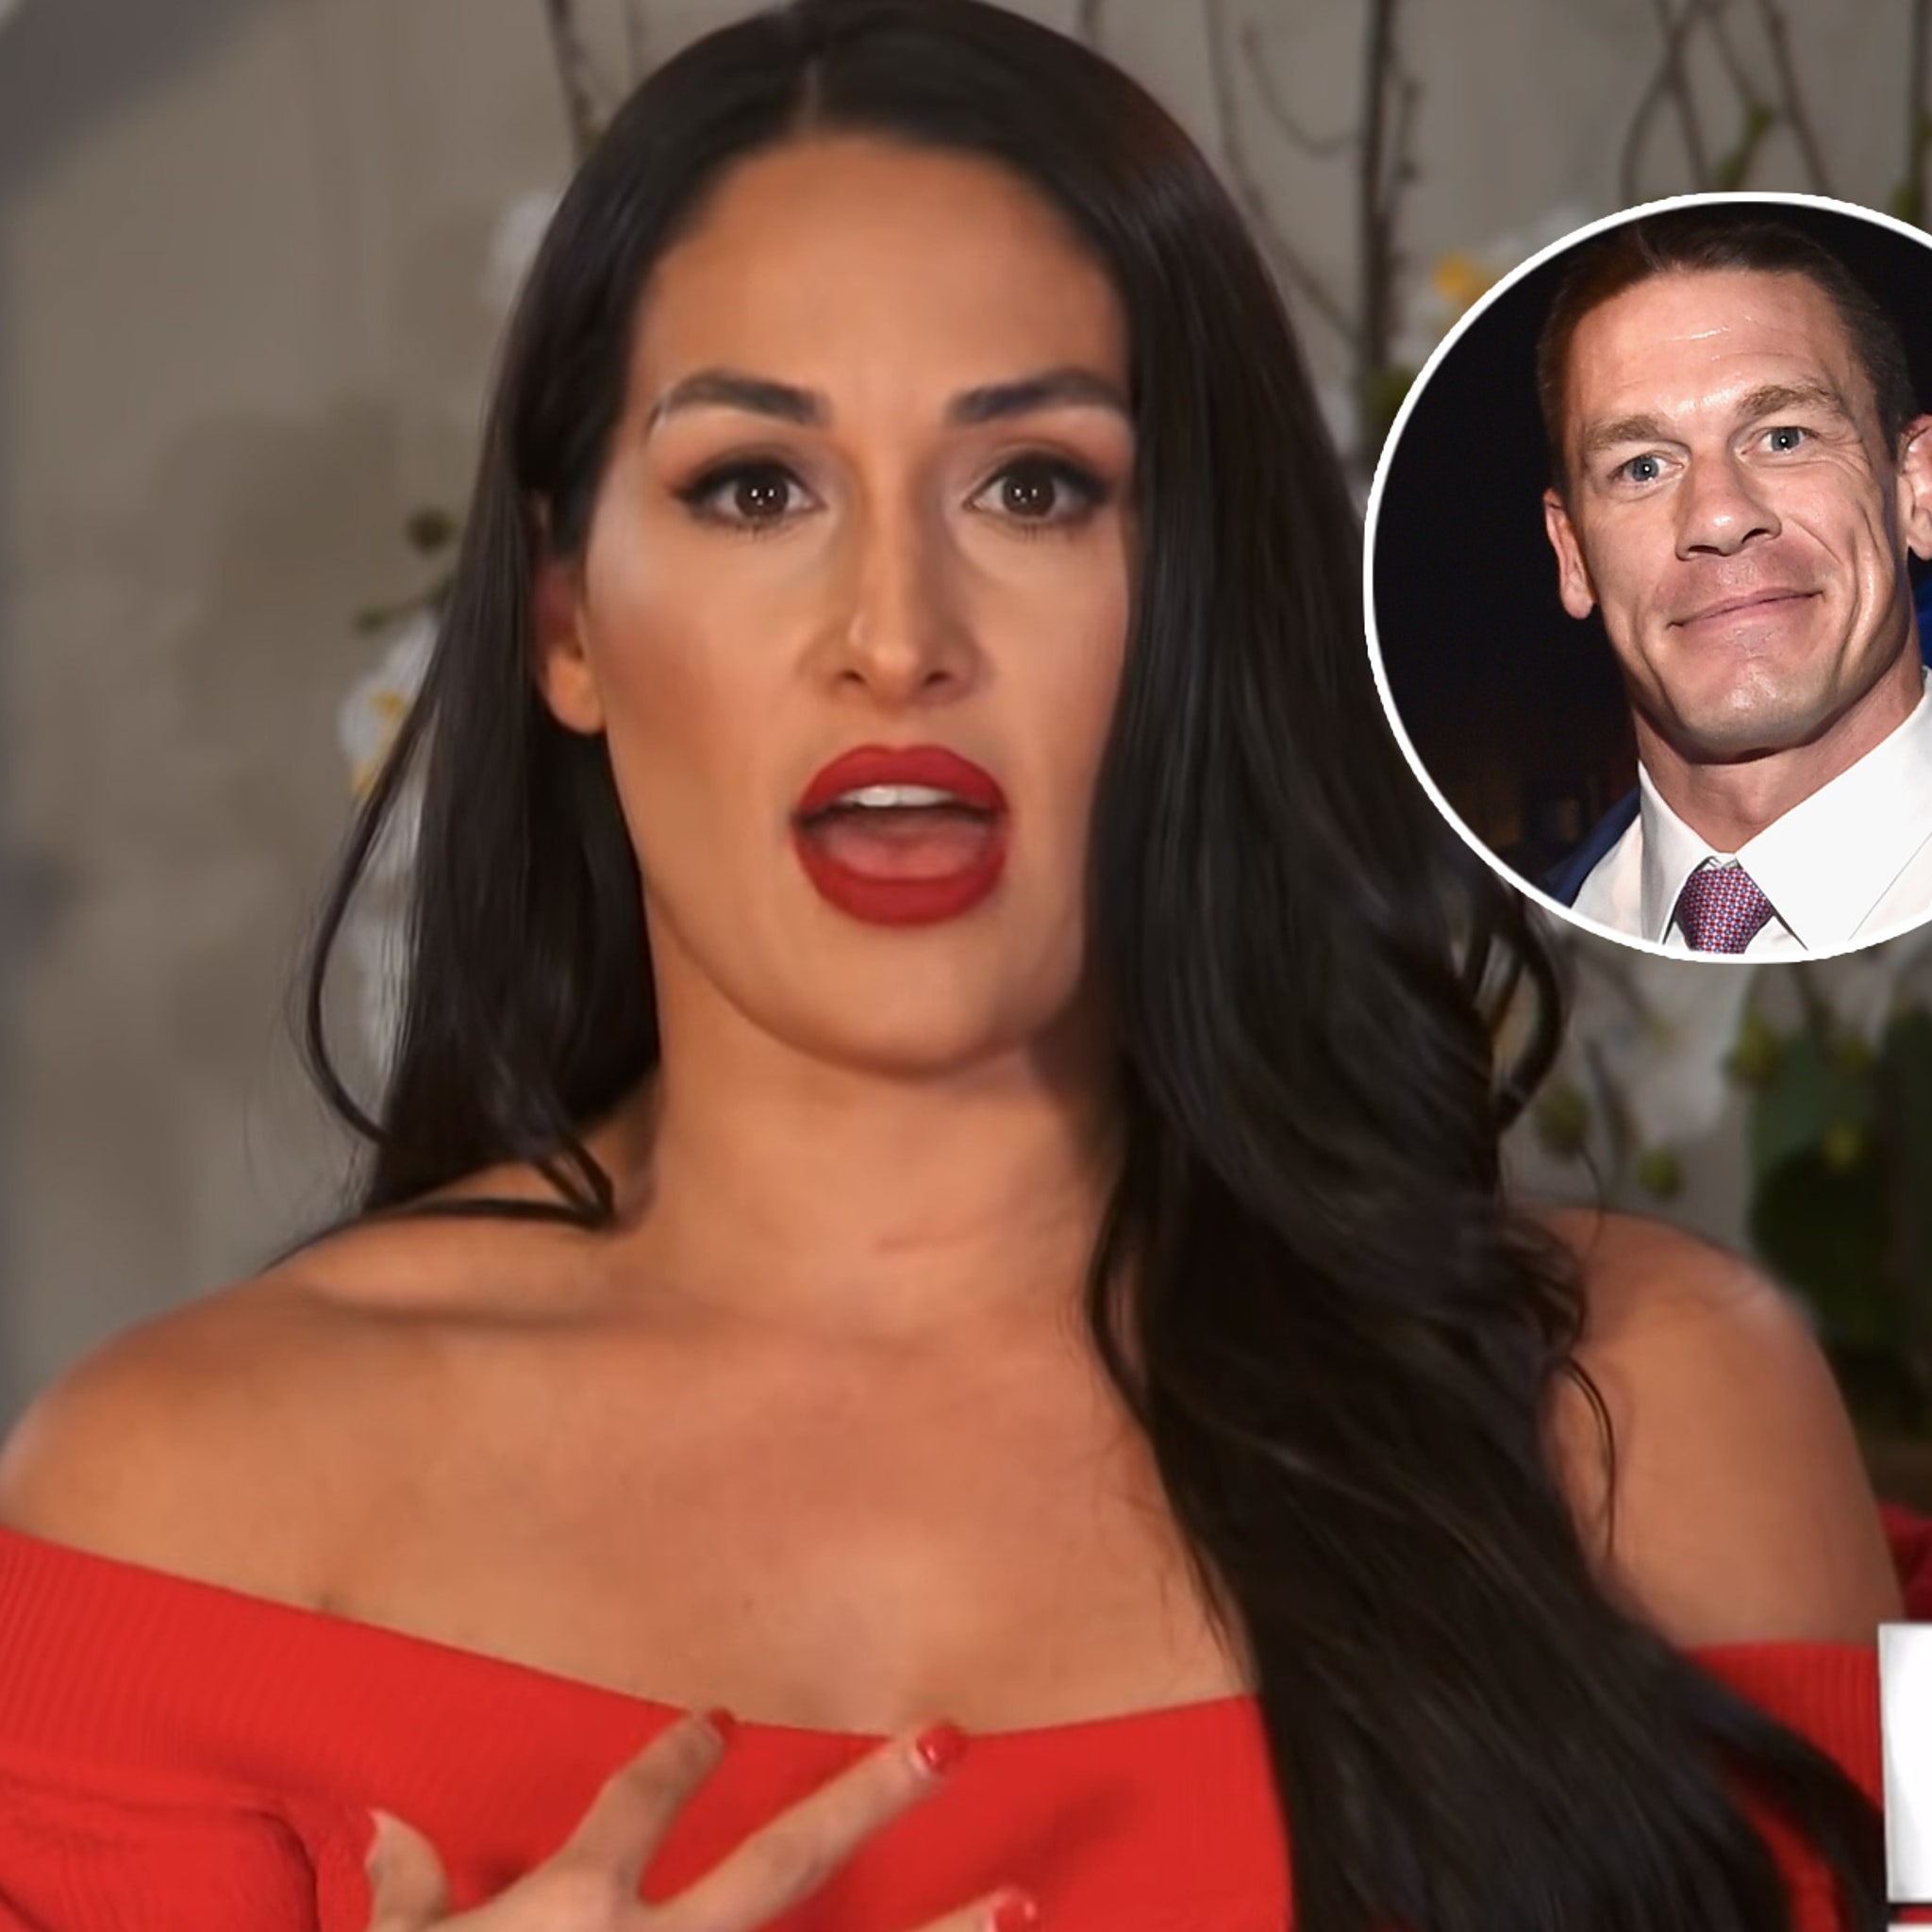 John Cenas Naked Big Butt Sex Scene Caused Problems in Bedroom for Nikki Bella picture photo pic